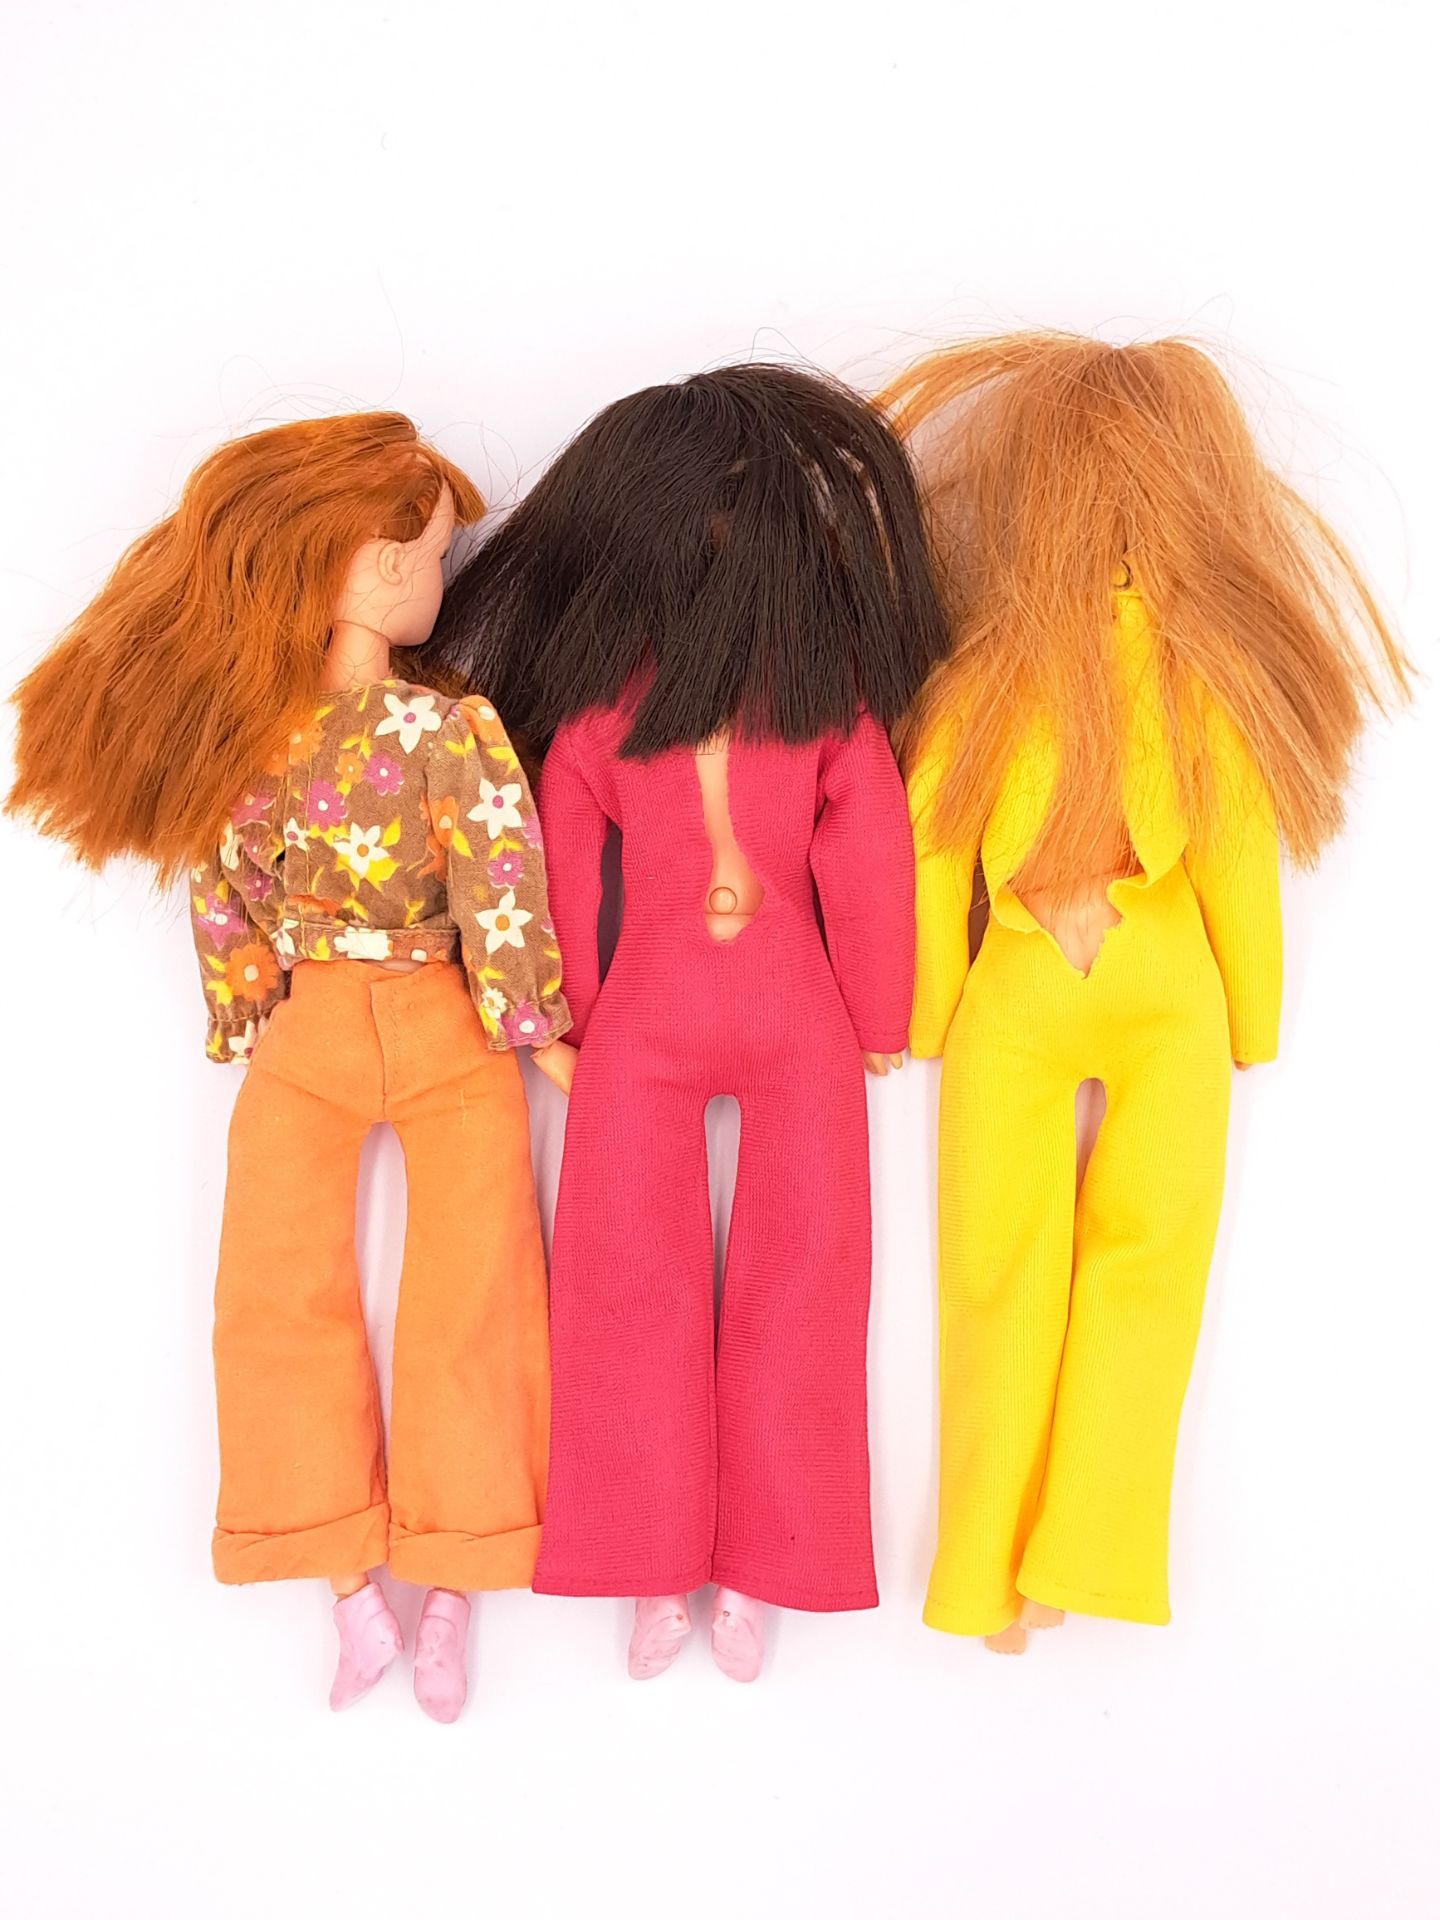 Dollikins Action Girl vintage dolls x three, 1960s / 1970s - Image 2 of 2